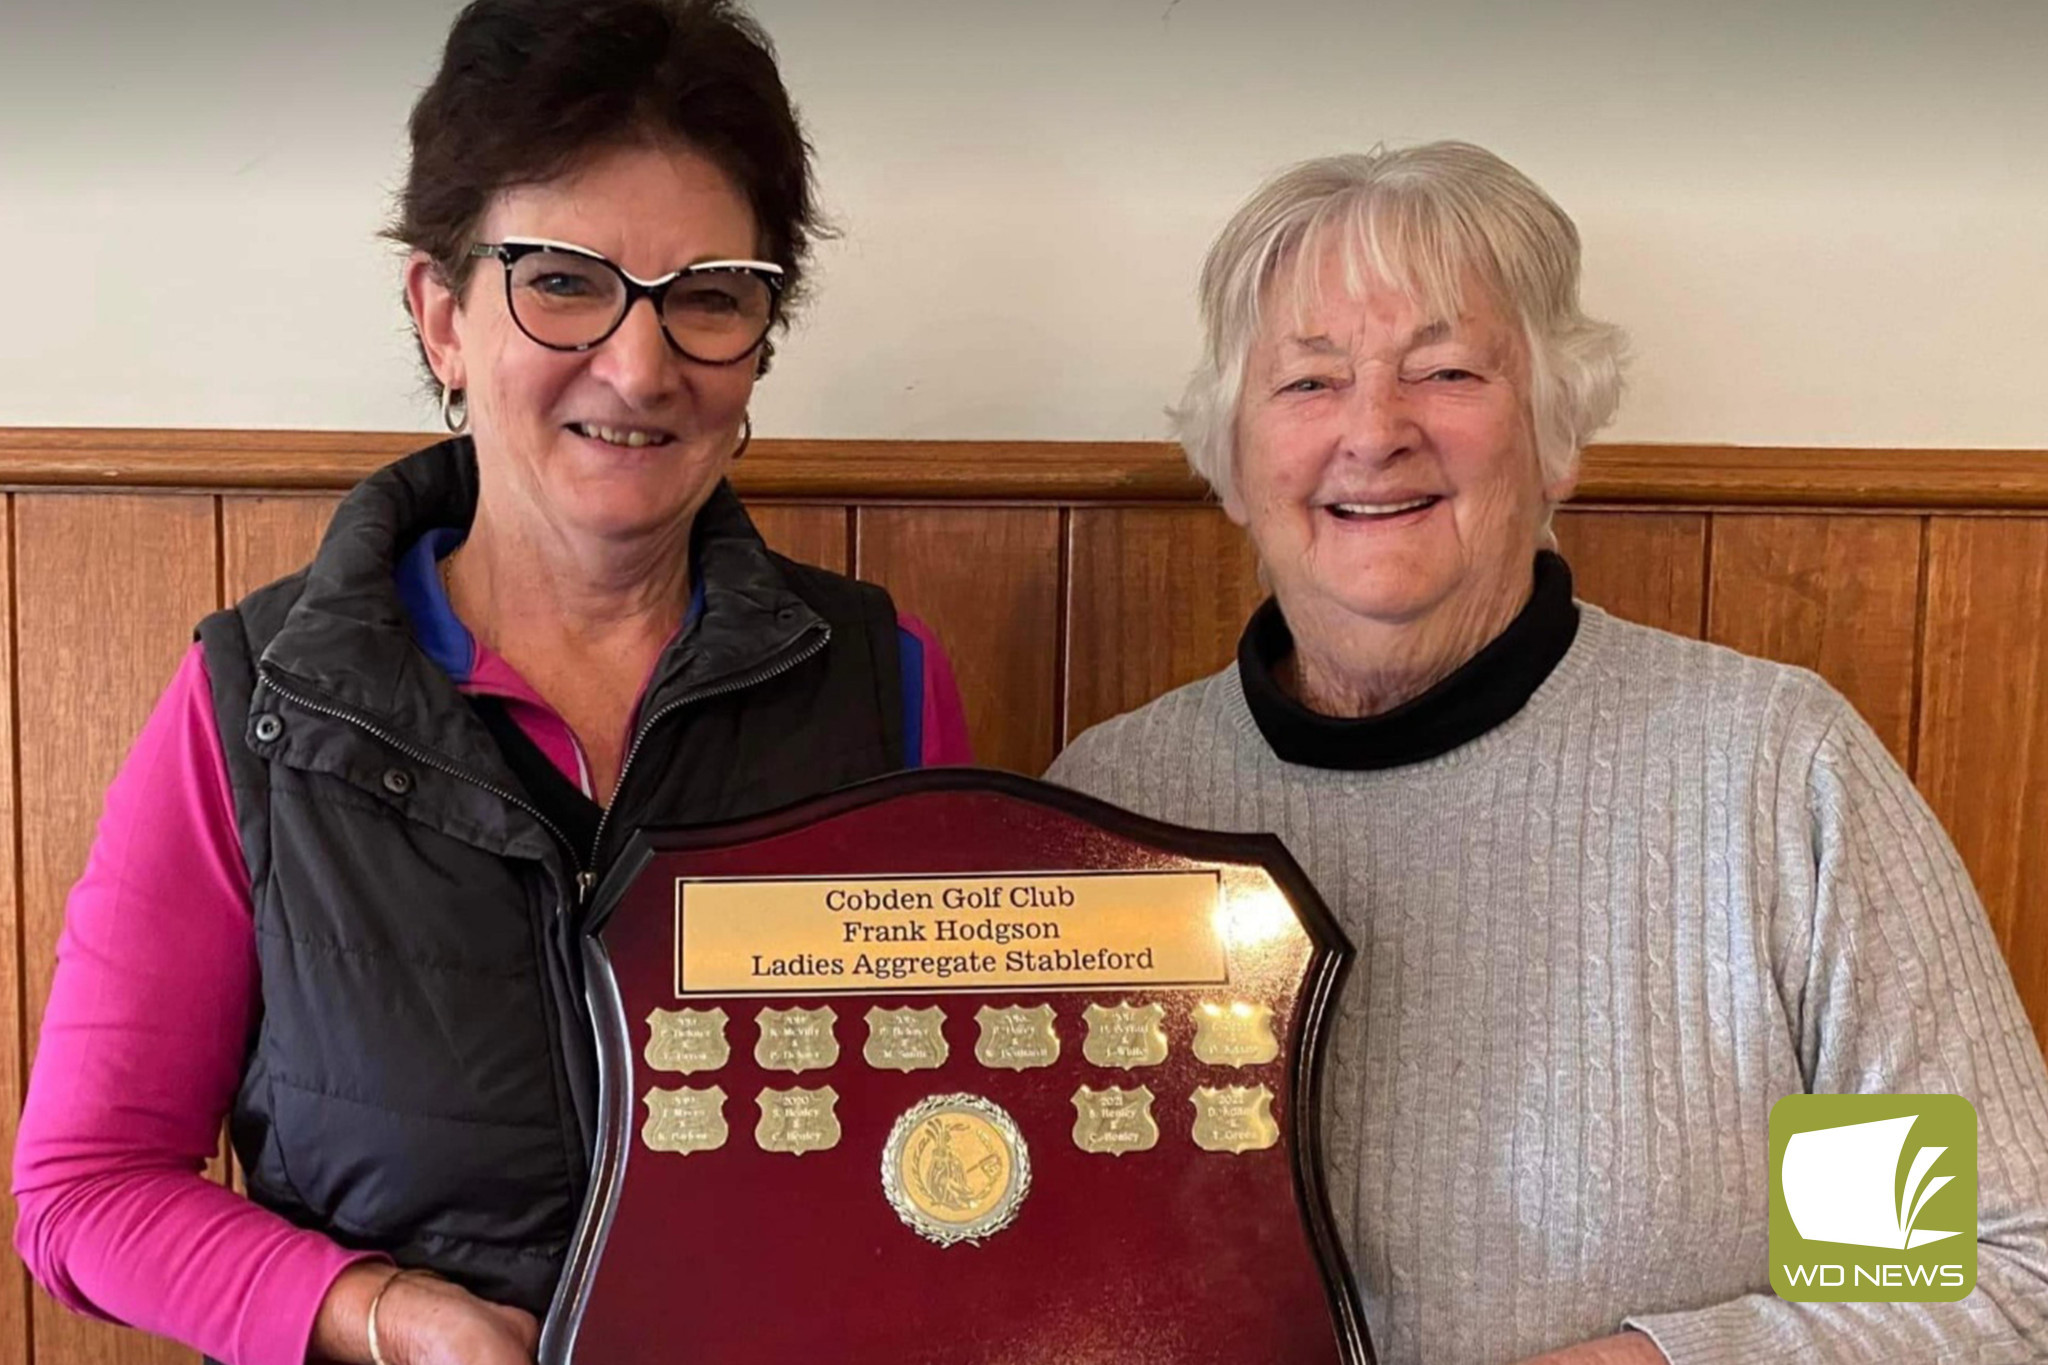 Winners of the Frank Hodgson Trophy were Di Adams and Thelma Green.